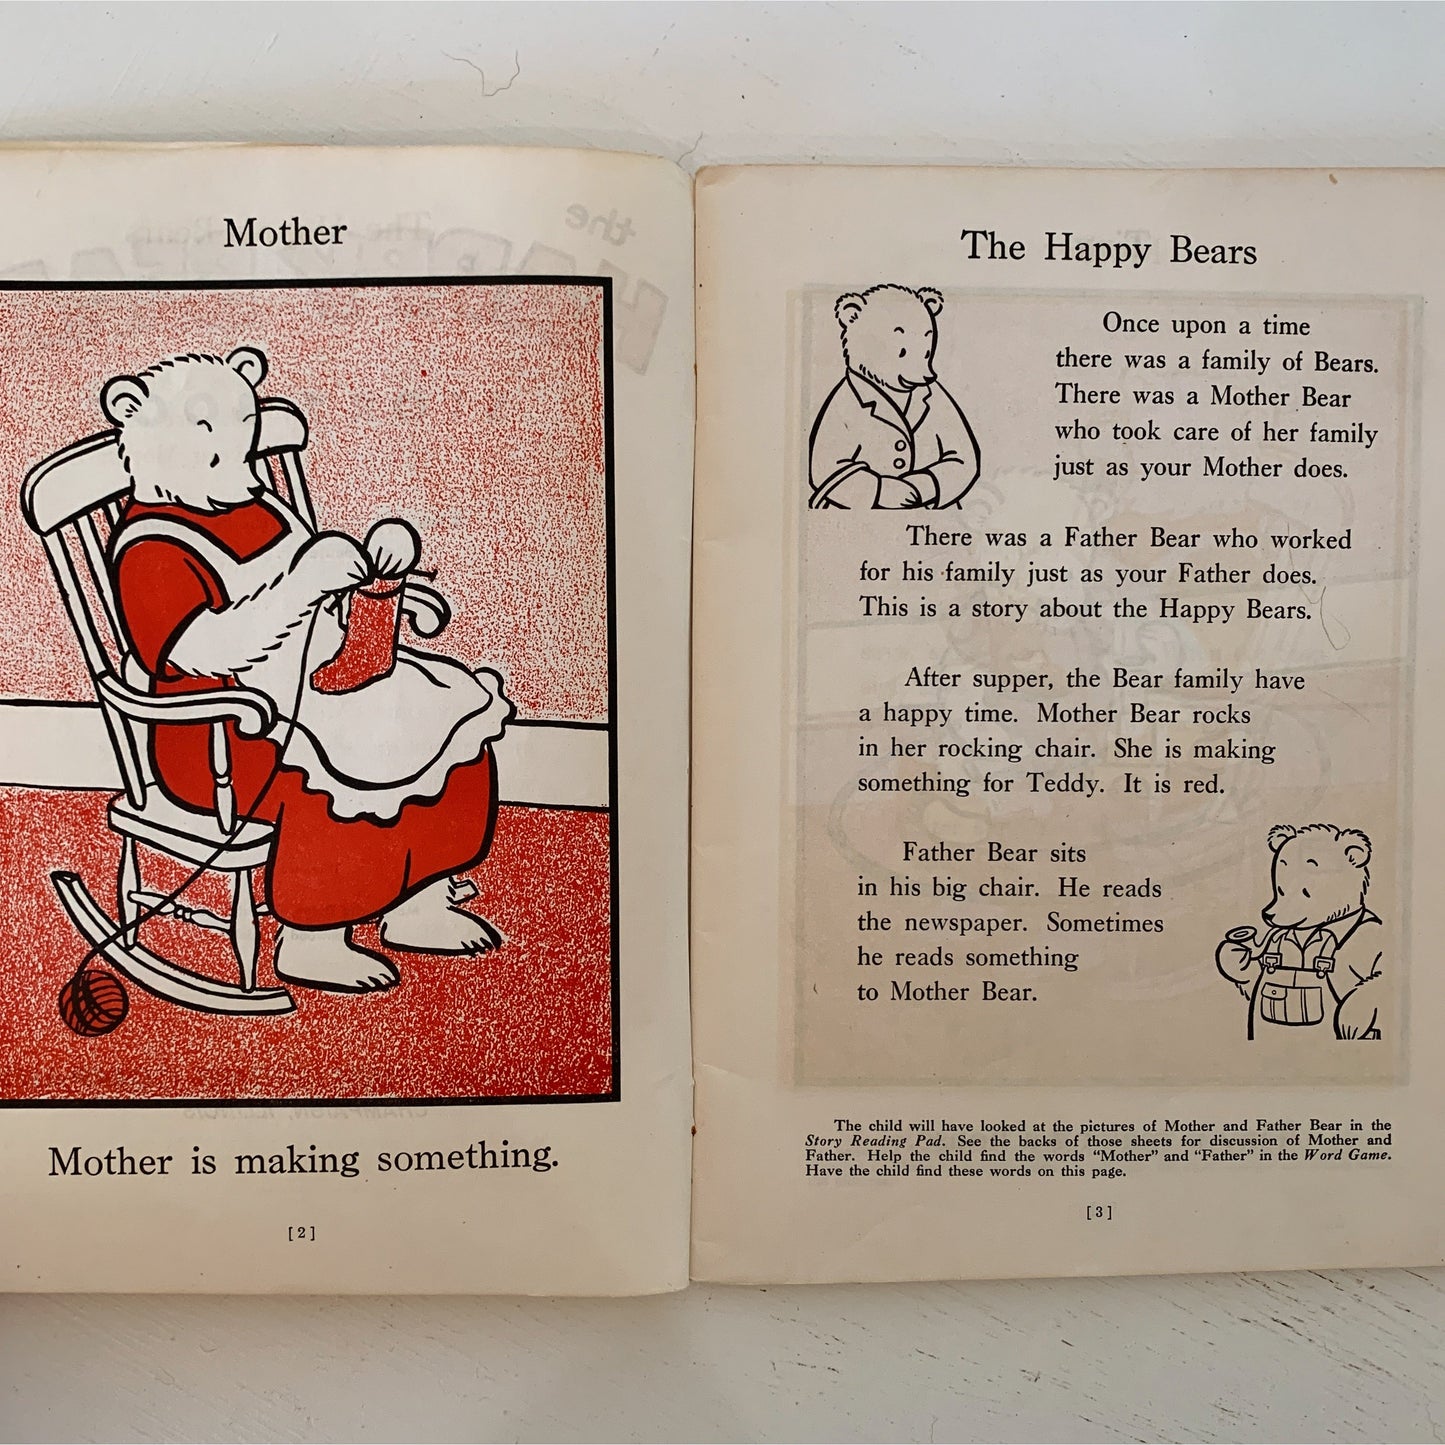 The Happy Bears, A Dolch Story Book, Paperback, 1956